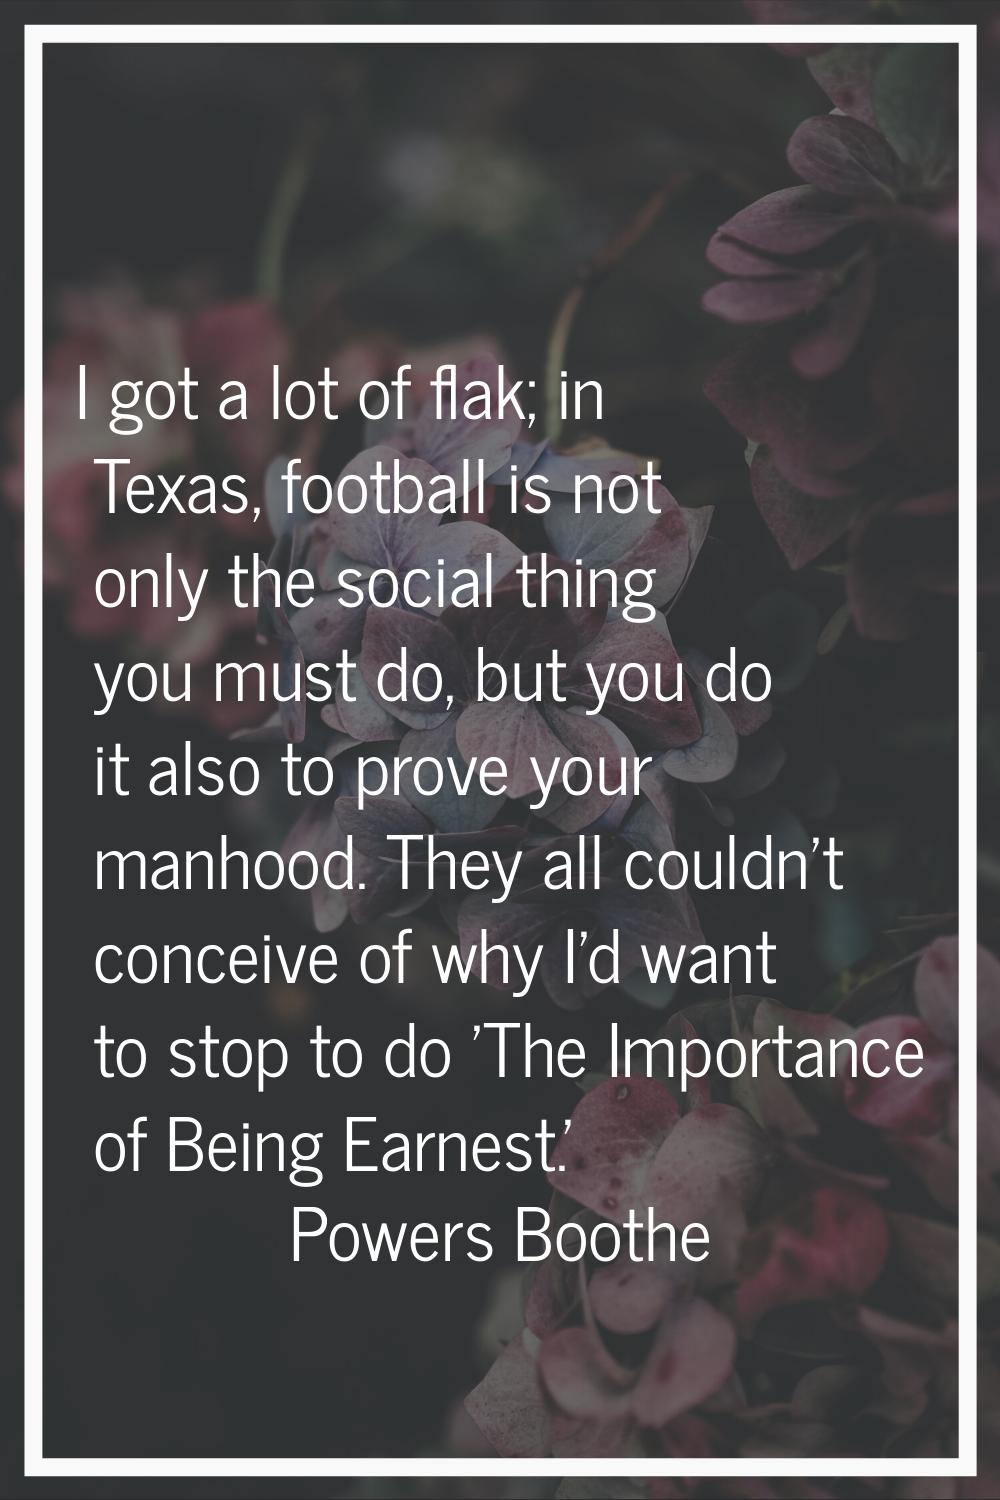 I got a lot of flak; in Texas, football is not only the social thing you must do, but you do it als